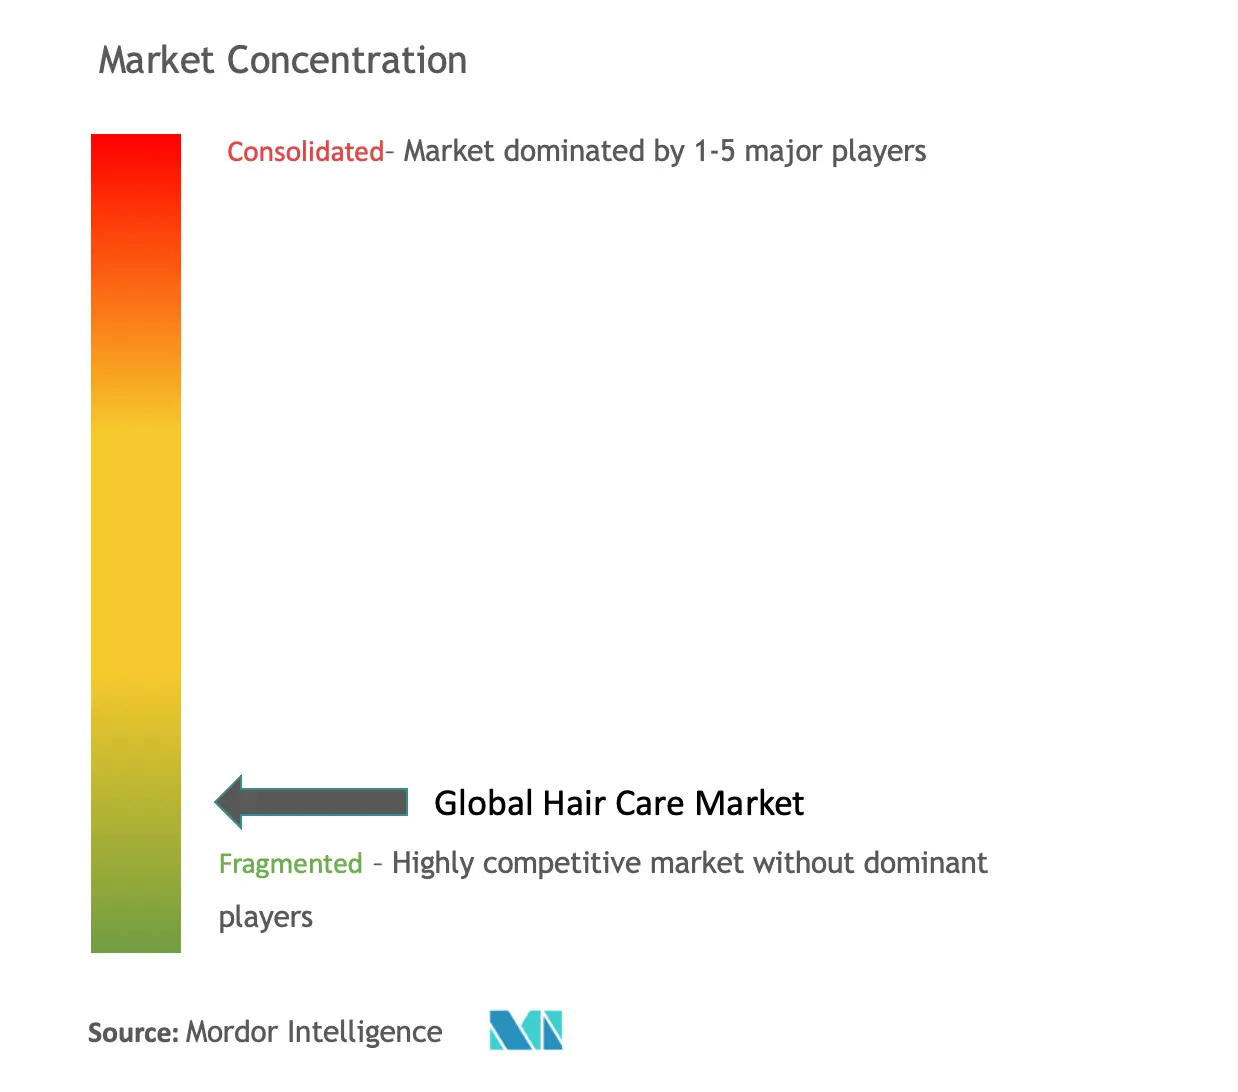 Hair Care Market Concentration